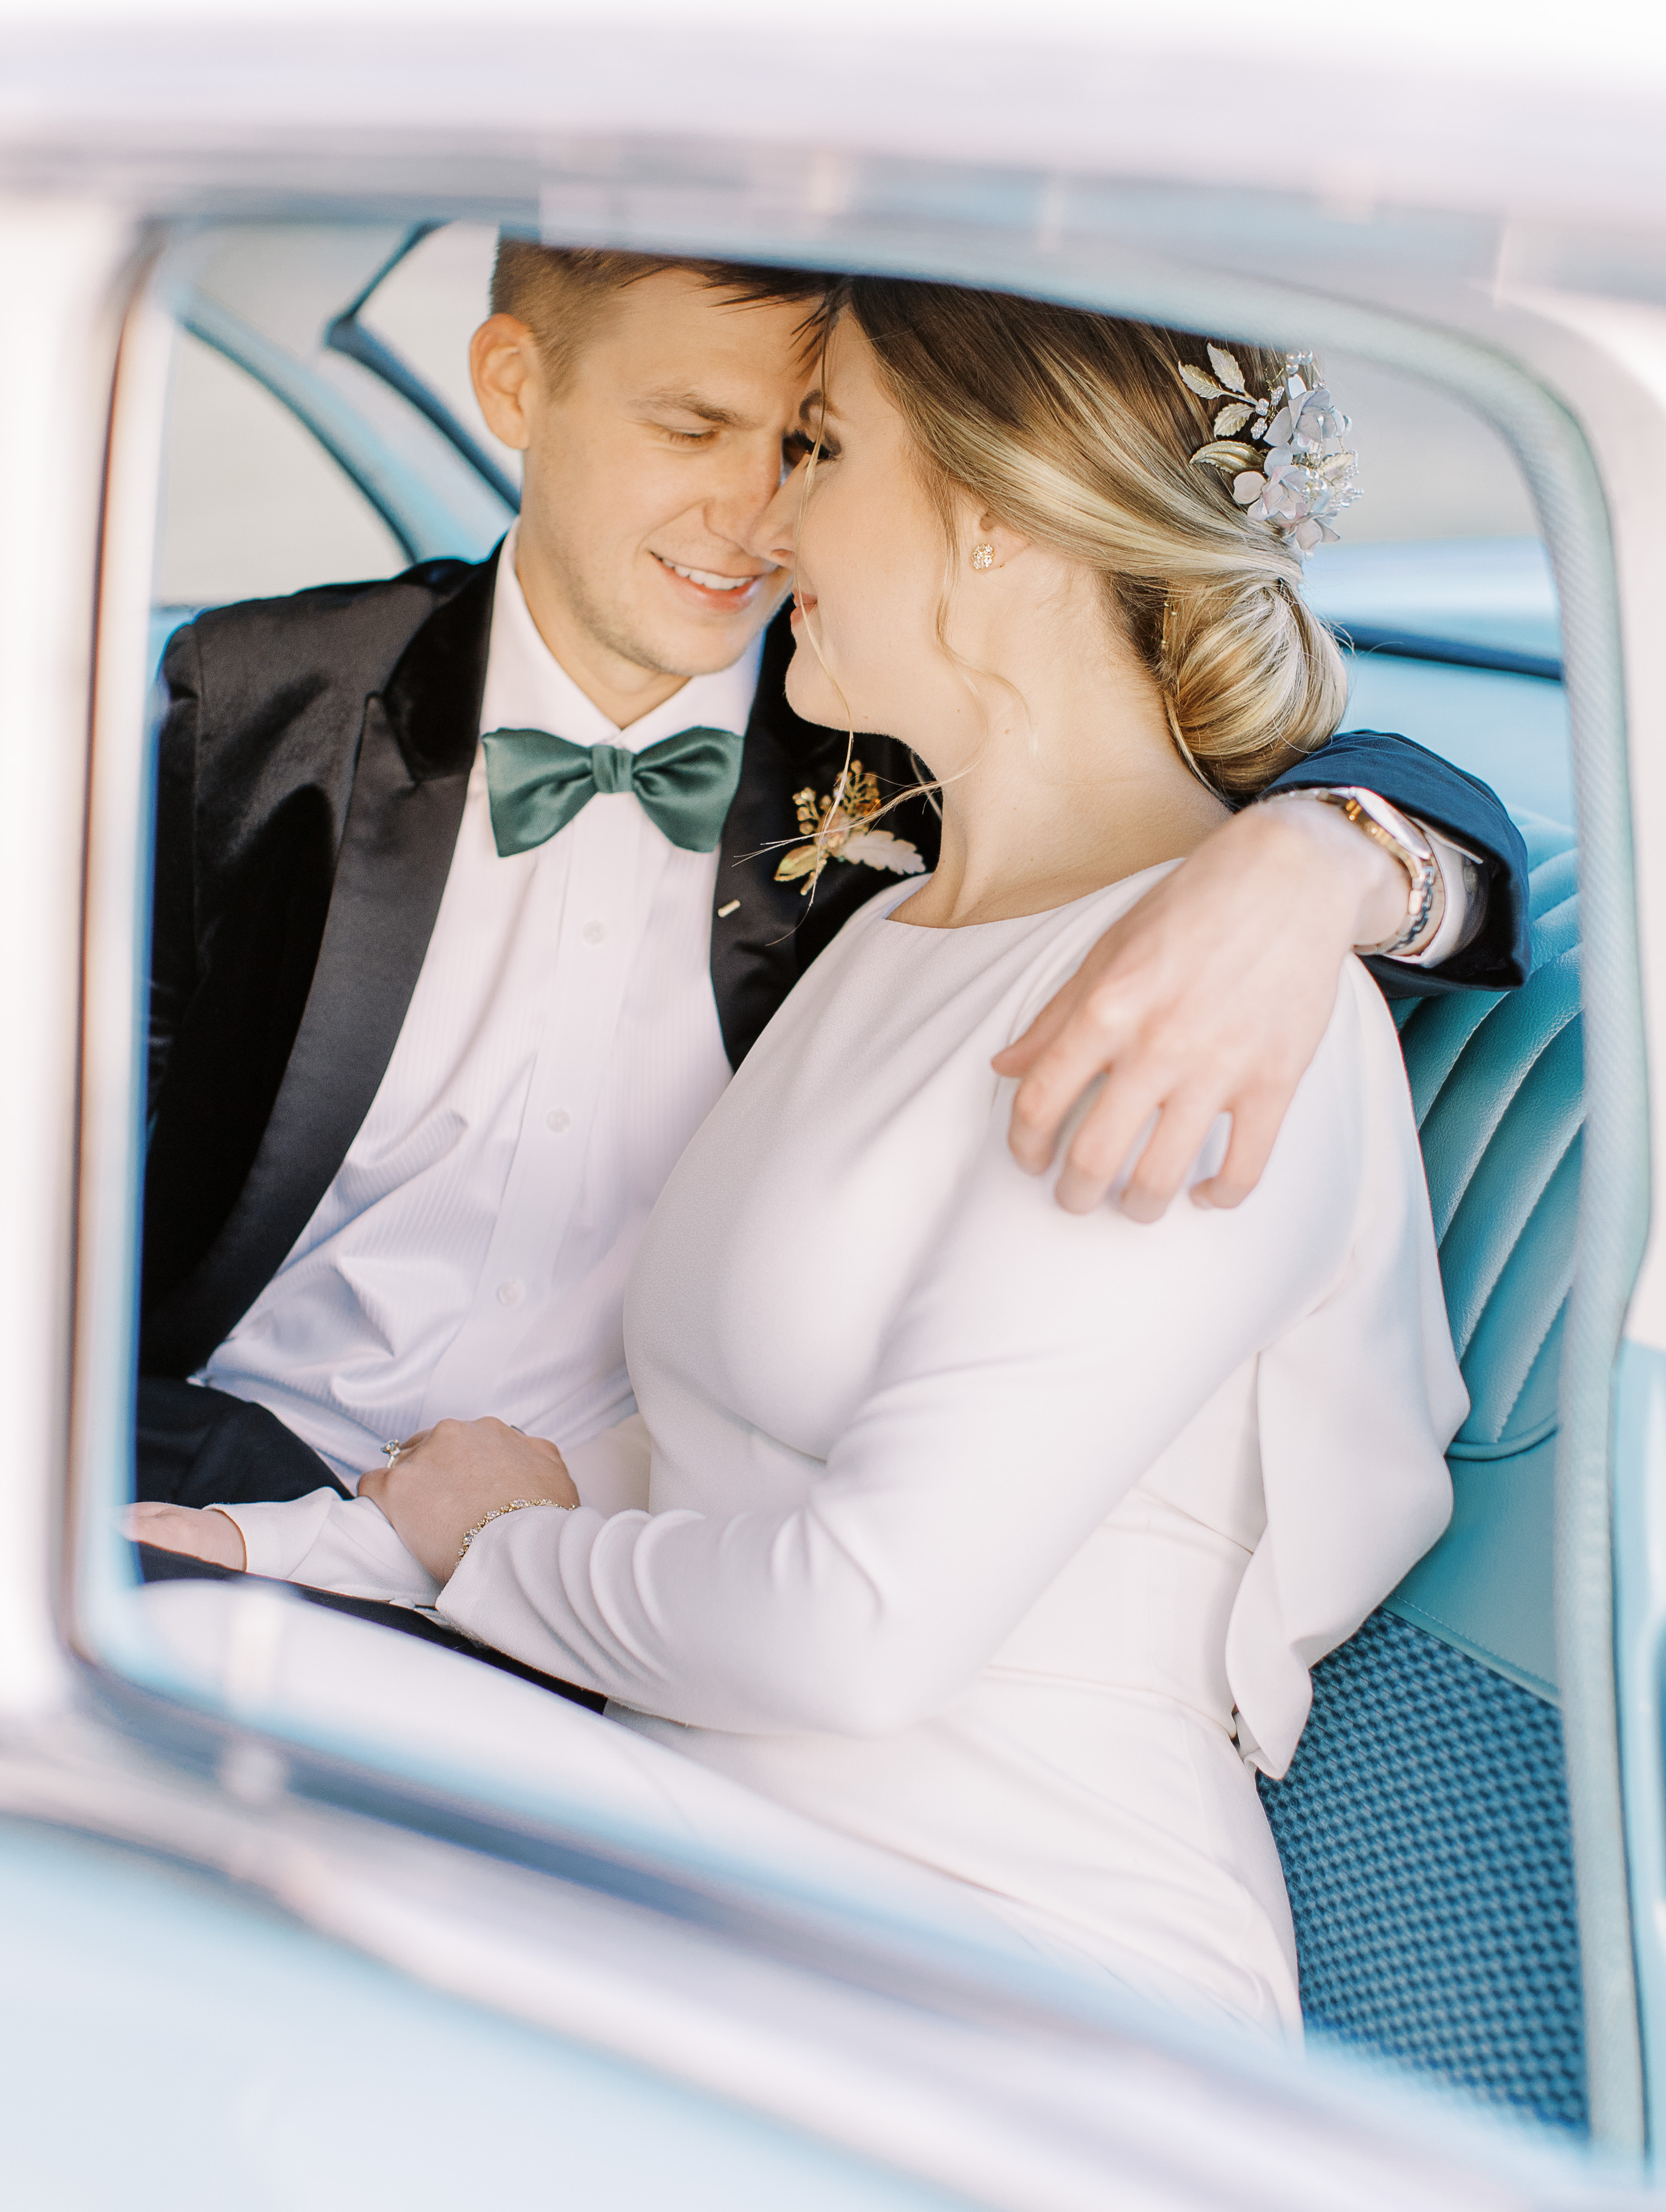 A groom puts his arm around his bride as they sit in the backseat of a vintage light blue car in Dripping Springs, TX at Cricket Hill Ranch.